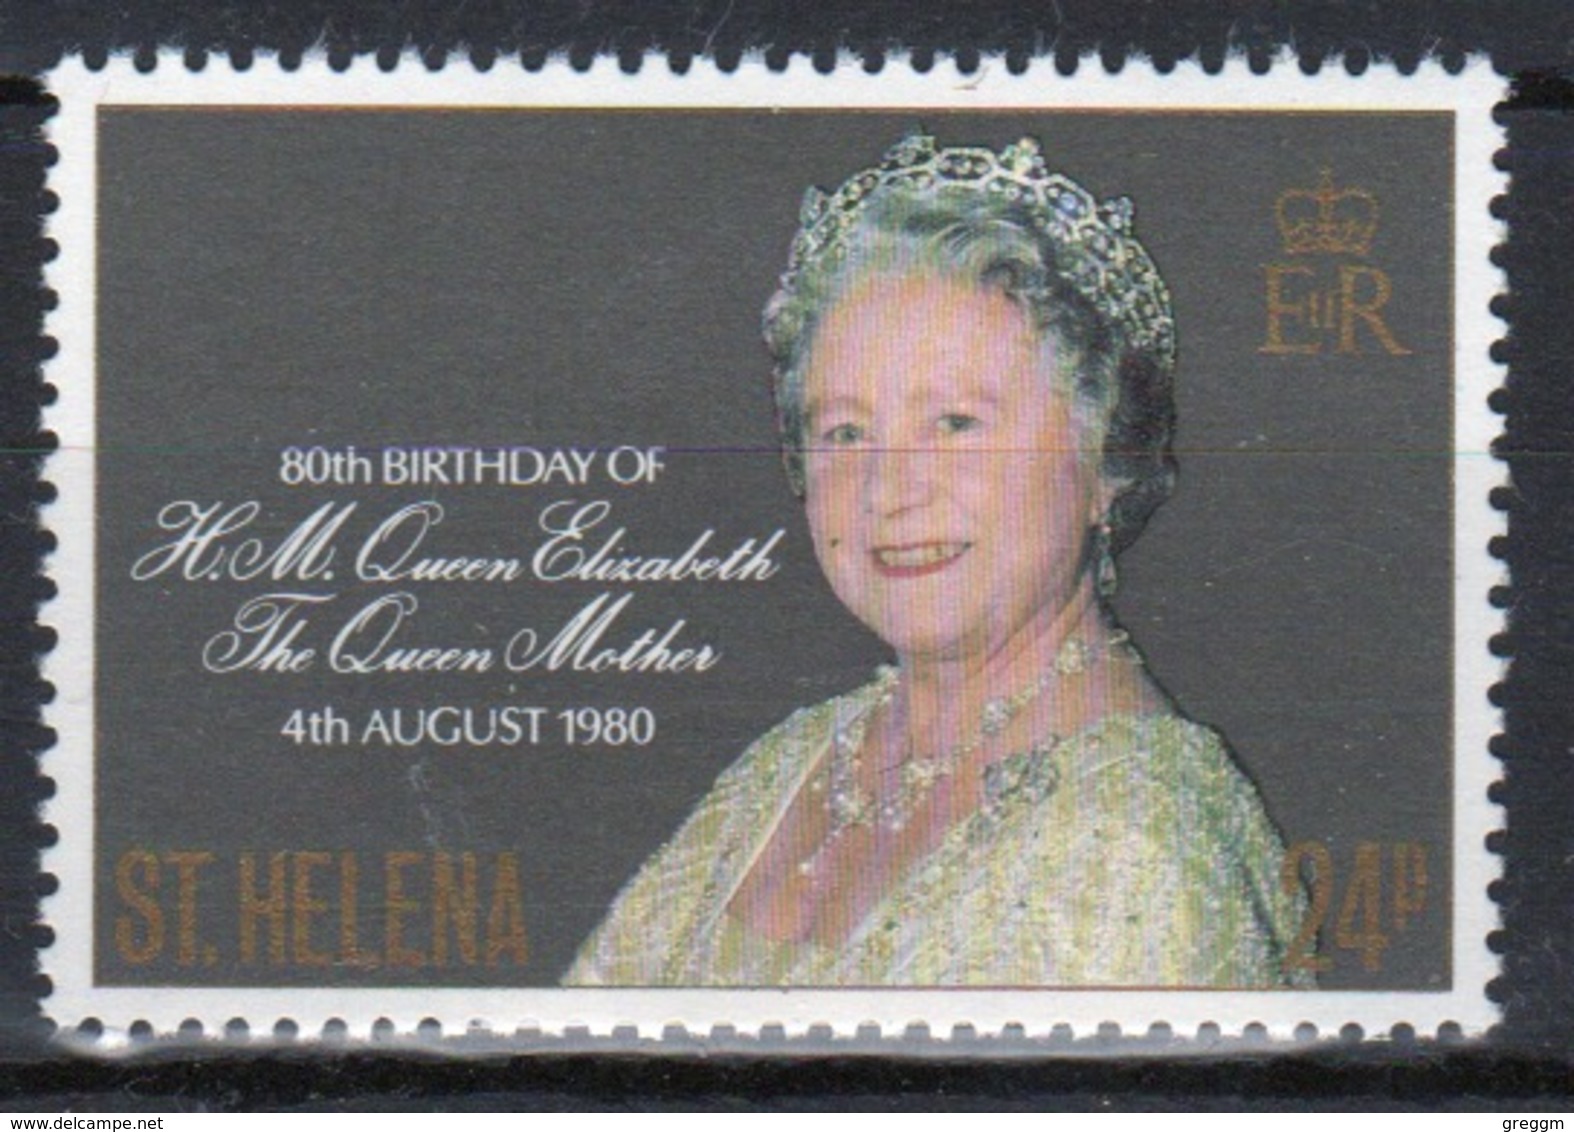 St Helena 1980 Set Of Stamps To Celebrate 80th Birthday Of The Queen Mother. - Saint Helena Island